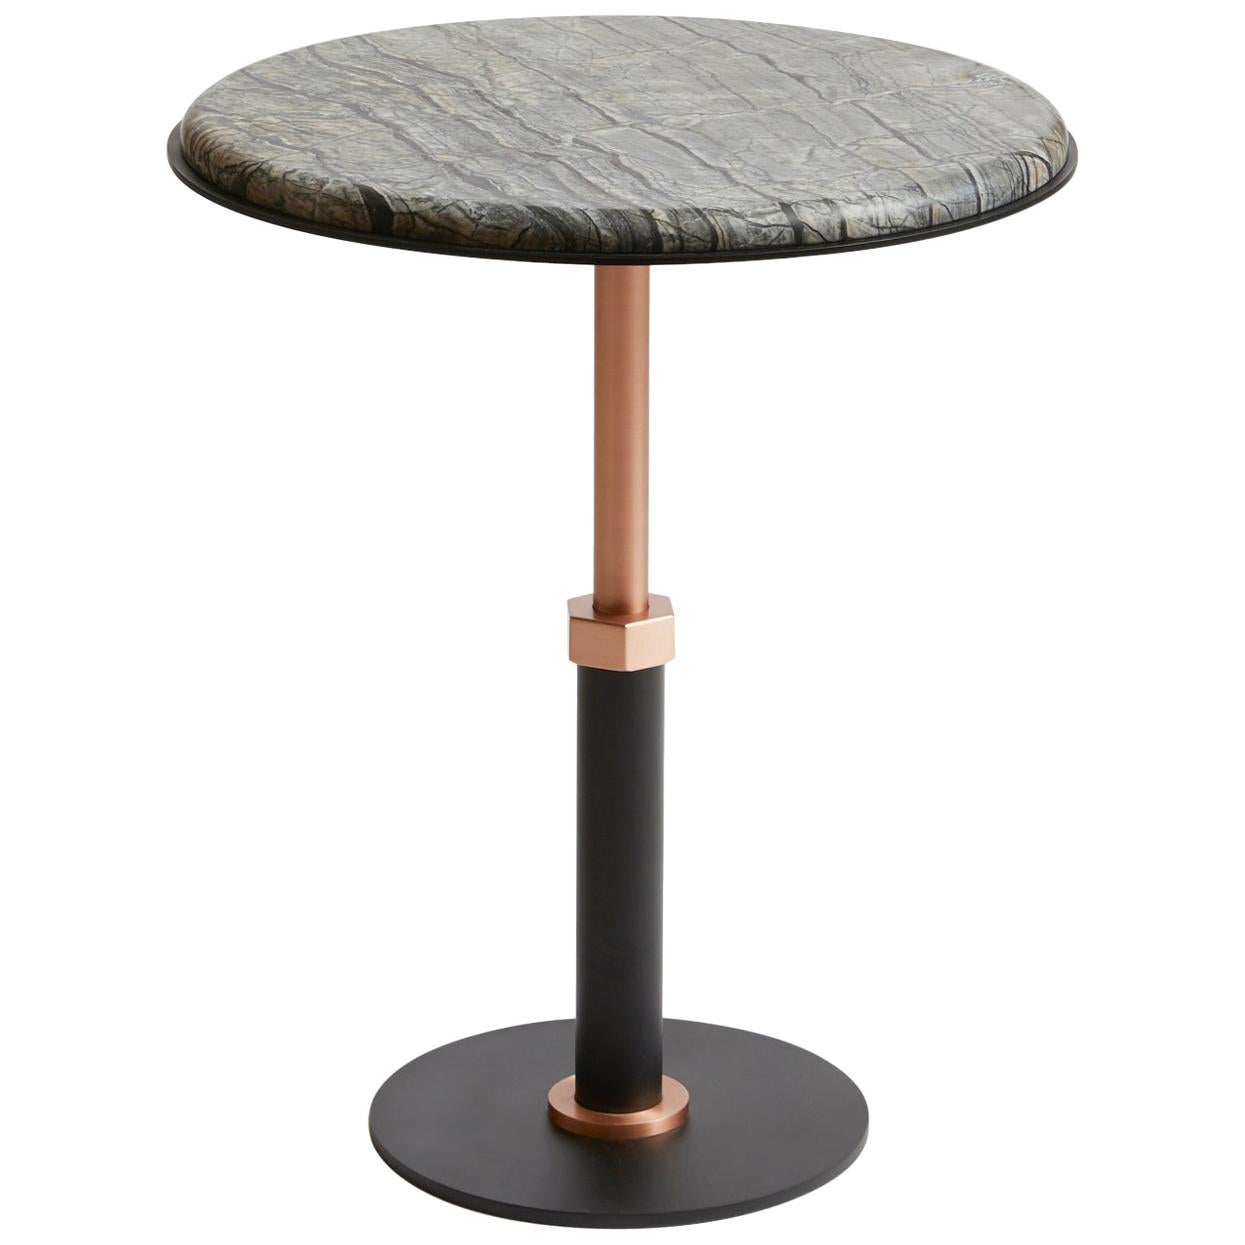 Silver (Onda D'Argento - Silver) Pedestal Round Side Table in Black Steel and Satin Copper Base by Gabriel Scott